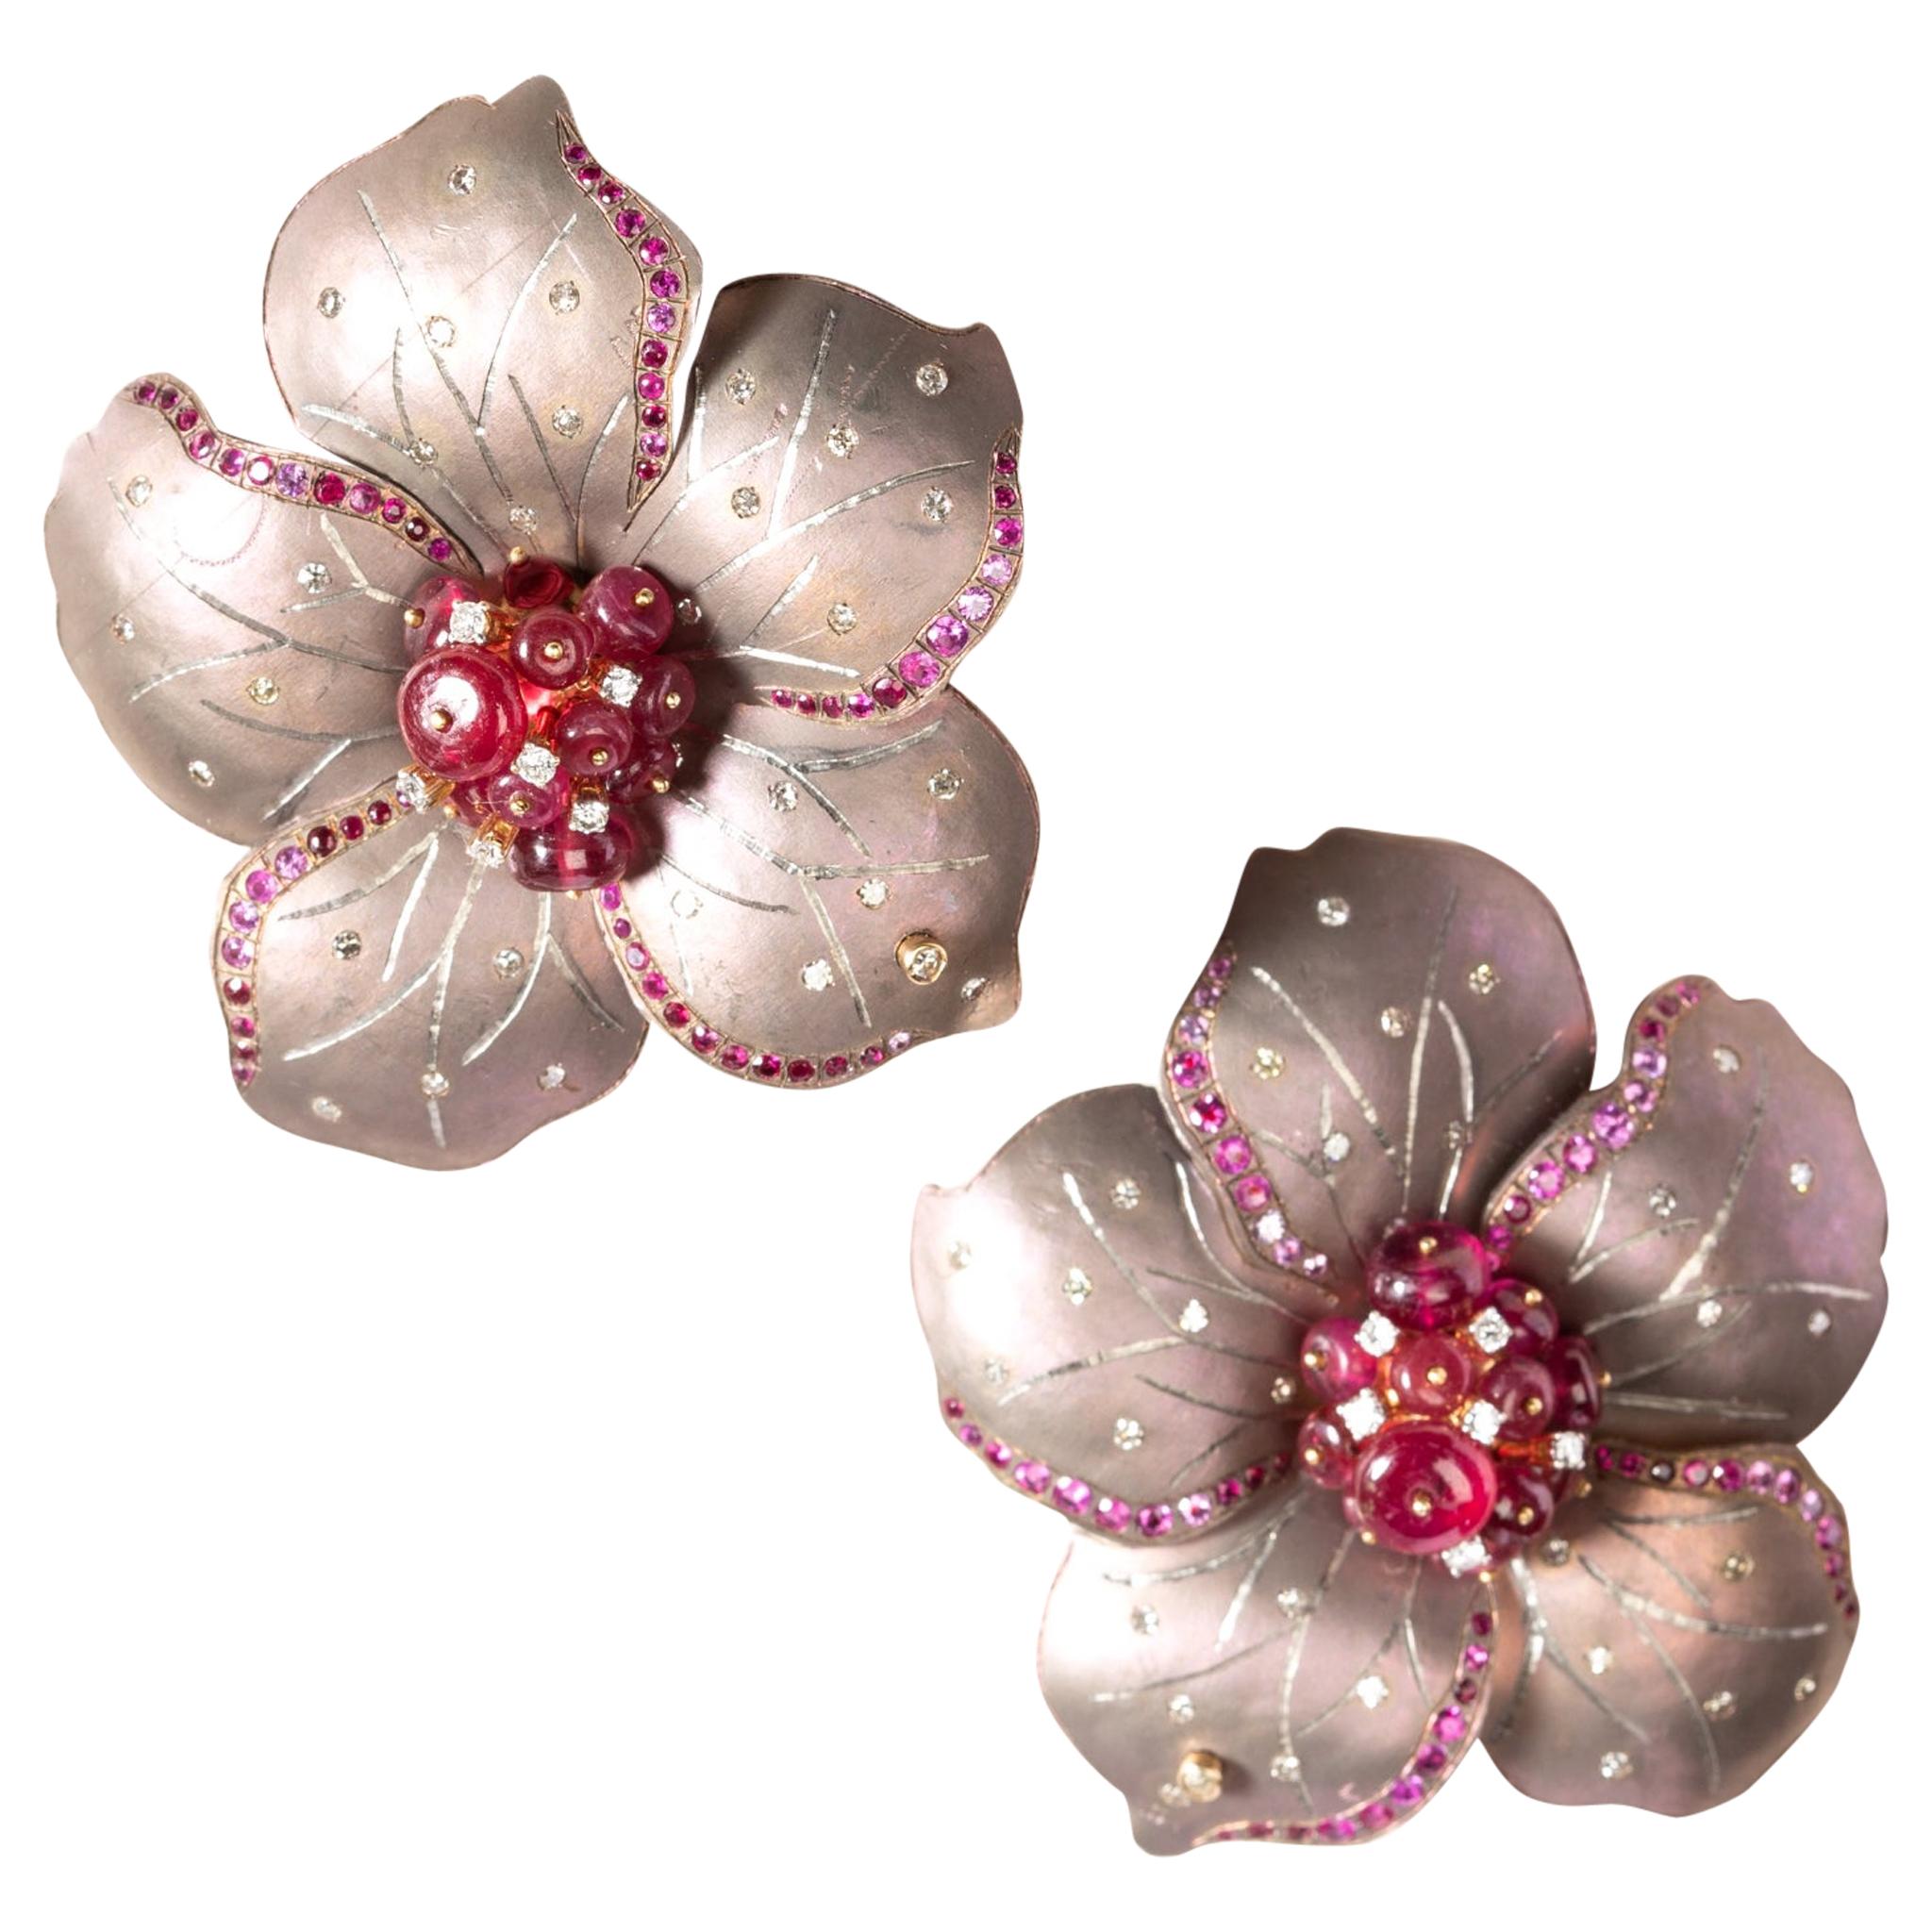 Rose-Tinted Titanium Flower Earrings with Rubies and Diamonds